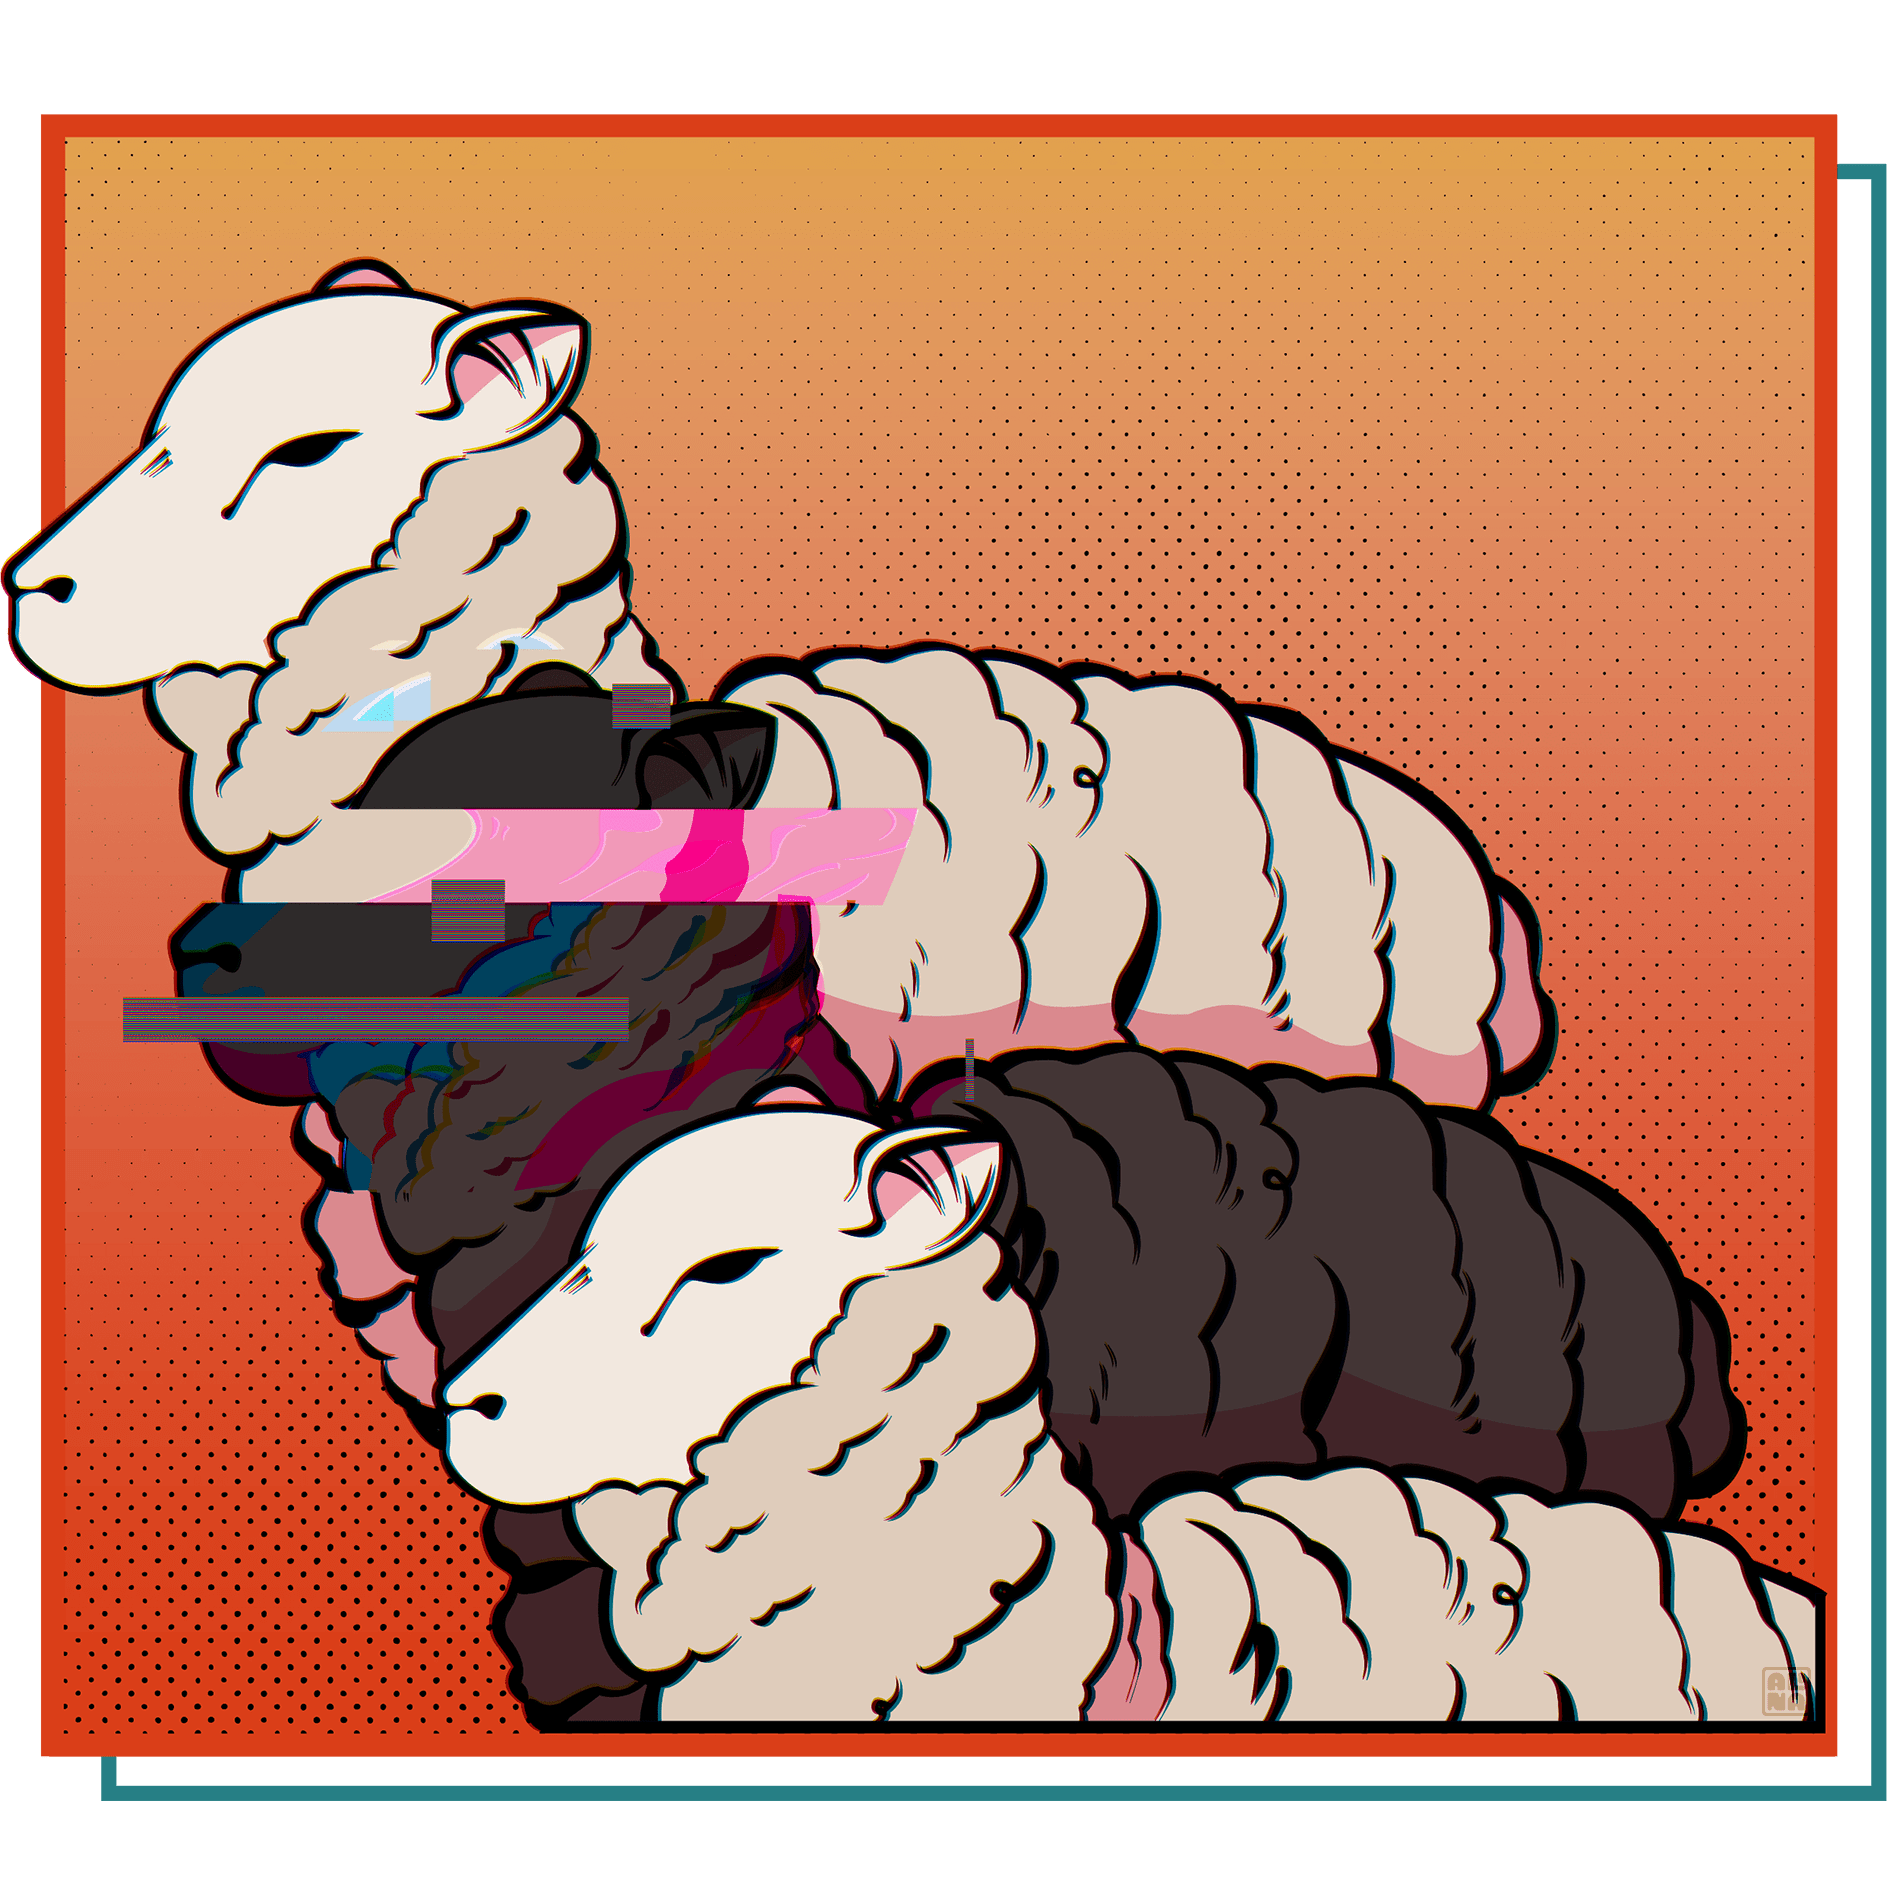 Vector illustration piece number 1 Blackout depicting three sheep with one sheep being glitched out based on the phrase black sheep